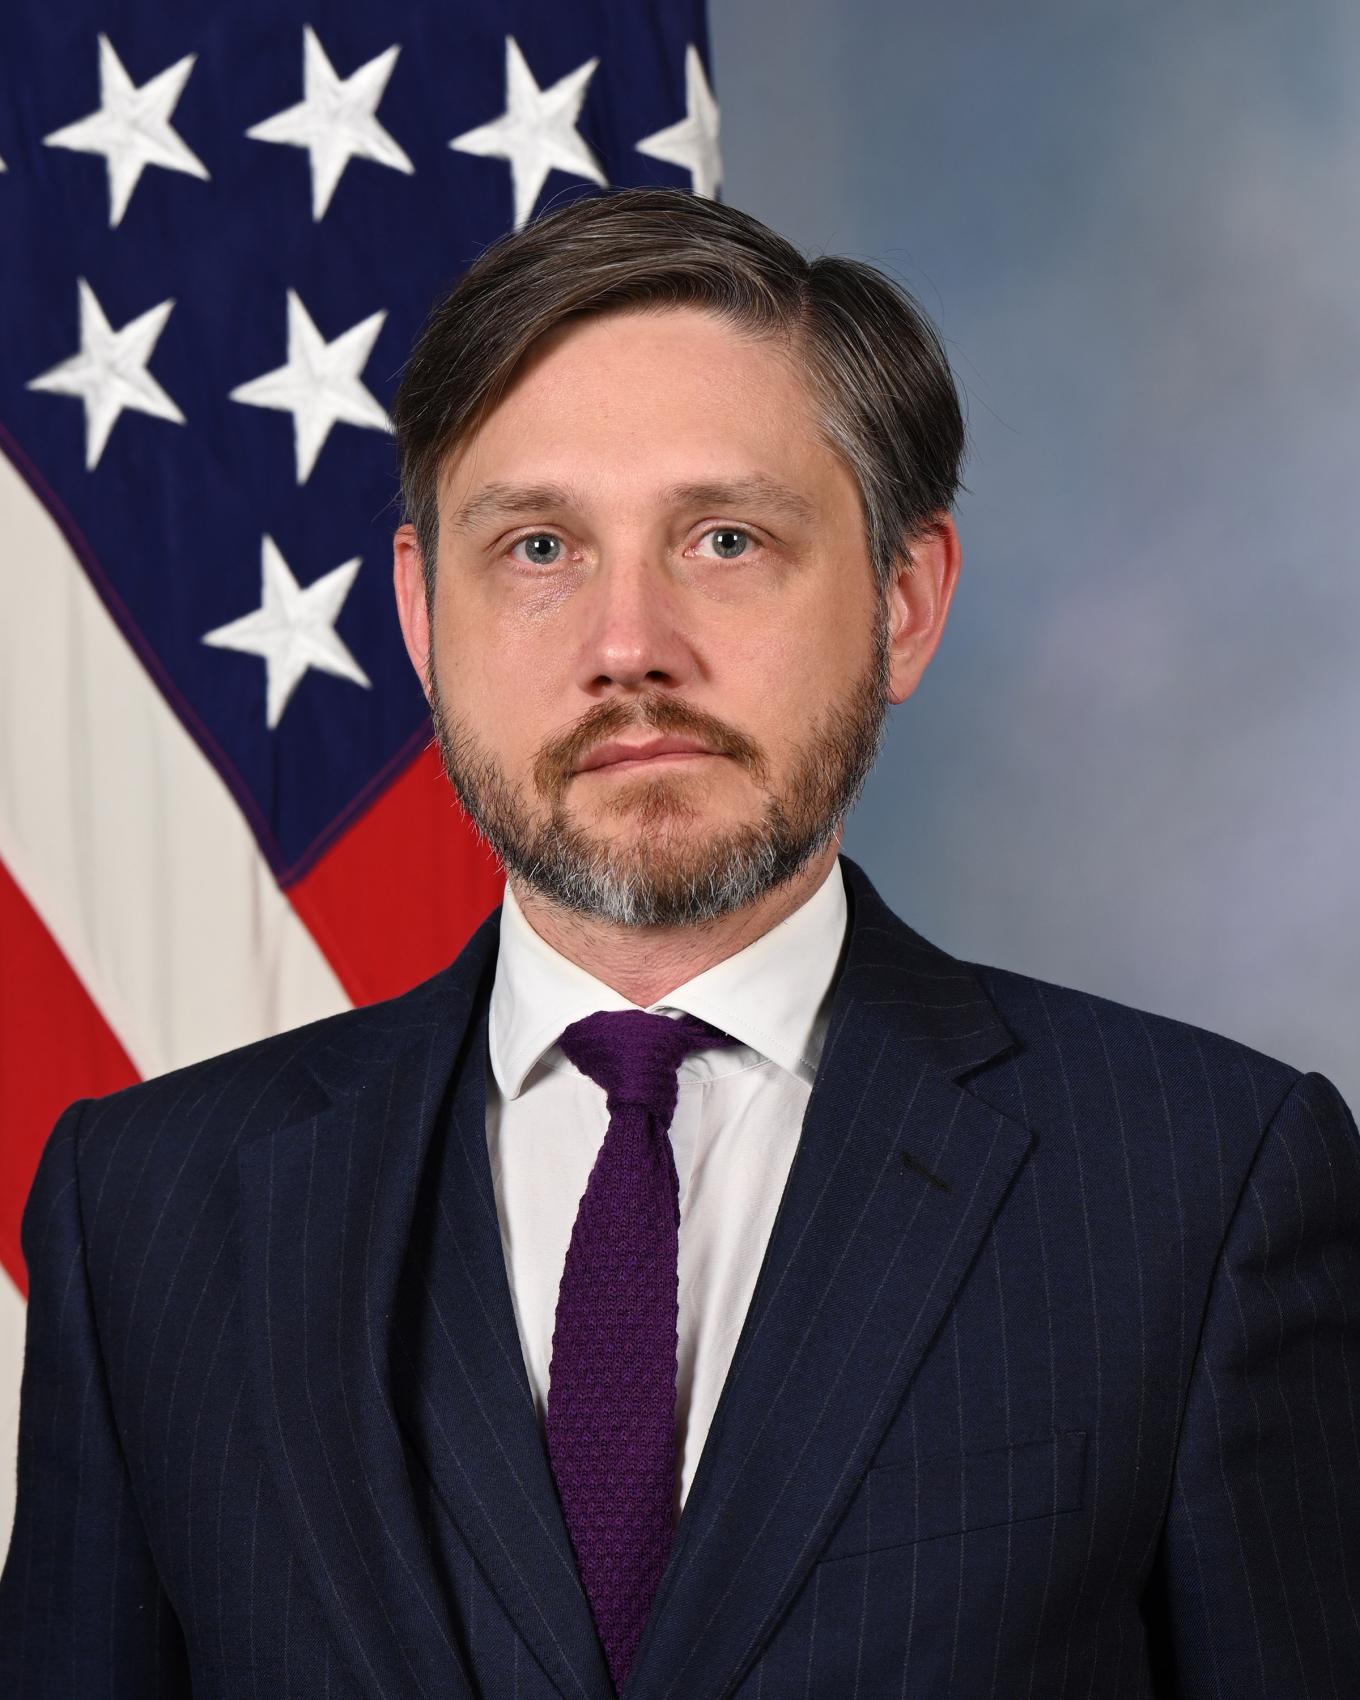 Dark haired man in navy blue suit in front of the American flag